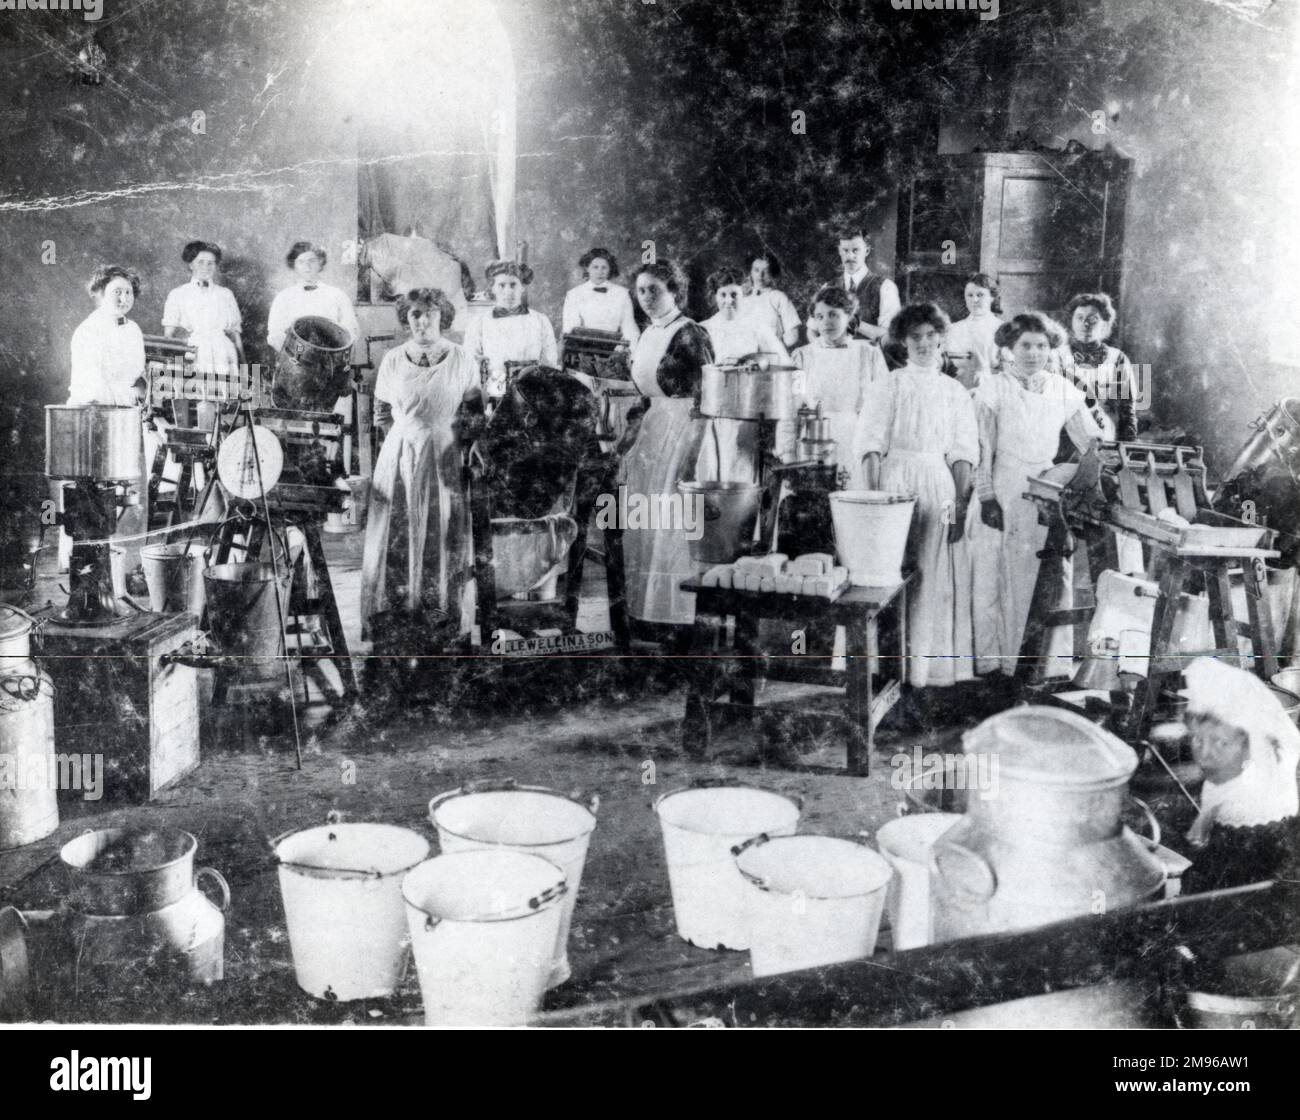 A group of employees, mostly women, of the Llewellin Churn Works at North Gate, Haverfordwest, Pembrokeshire, Dyfed, South Wales.  Butter making equipment can be seen, as well as fresh pats of butter, large milk churns, and enamelled buckets for moving milk. Stock Photo